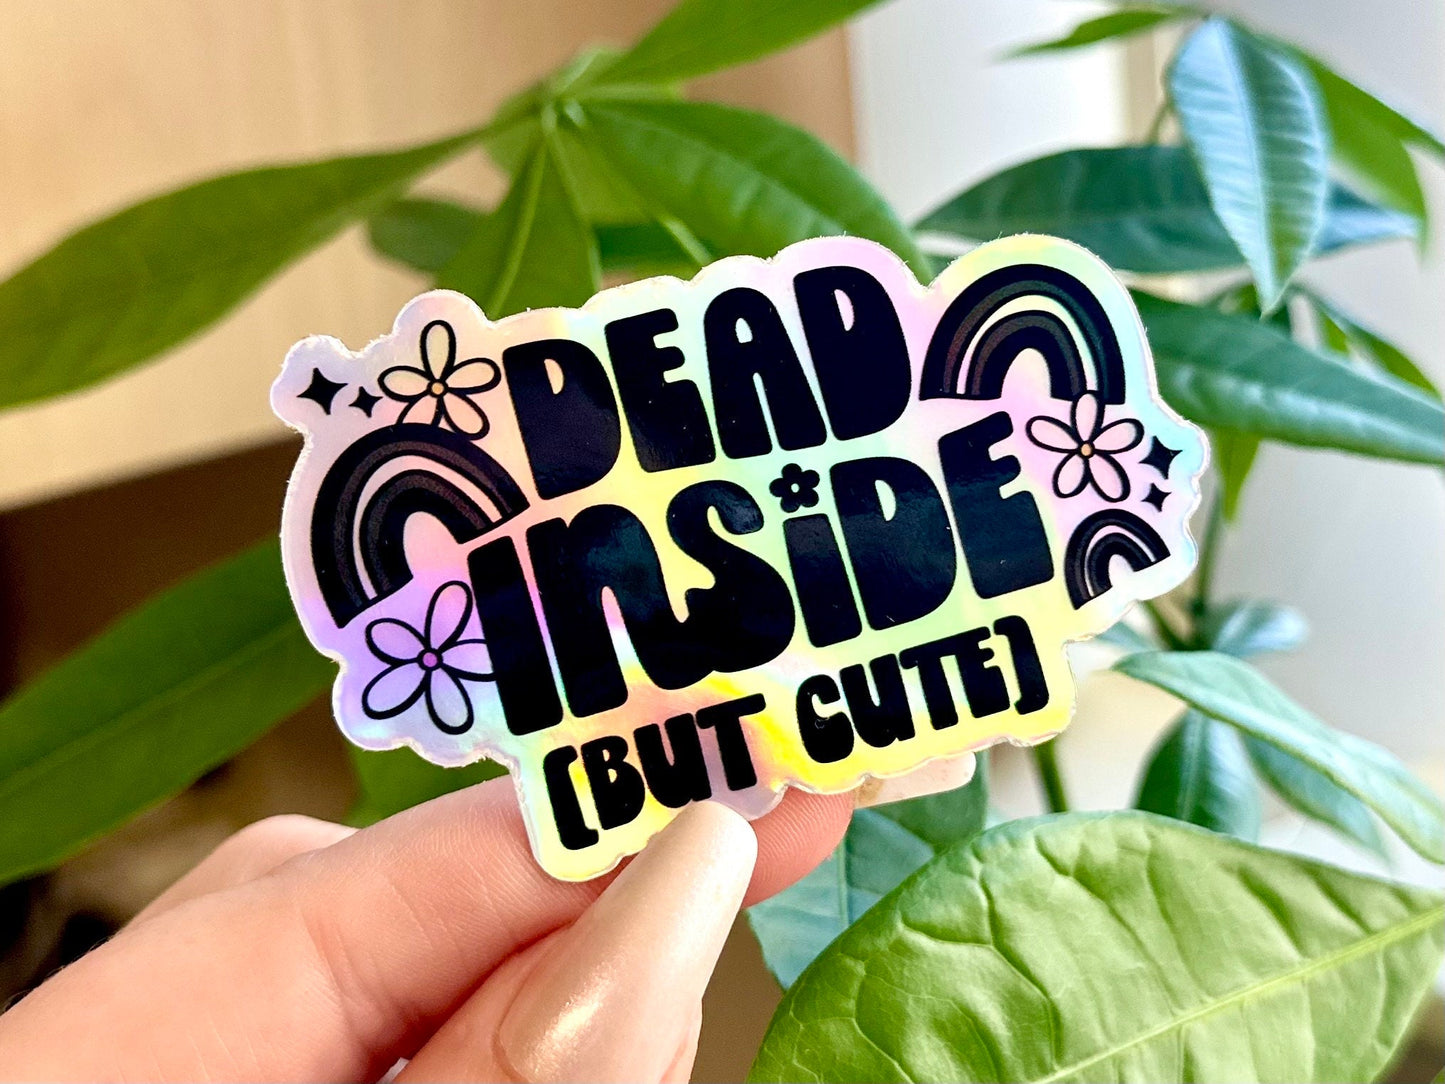 Dead Inside But Cute Holographic Waterproof Sticker, Intuition, Self Care, Self Love, Mental Health Gifts, Anxious, Cute Mental Health